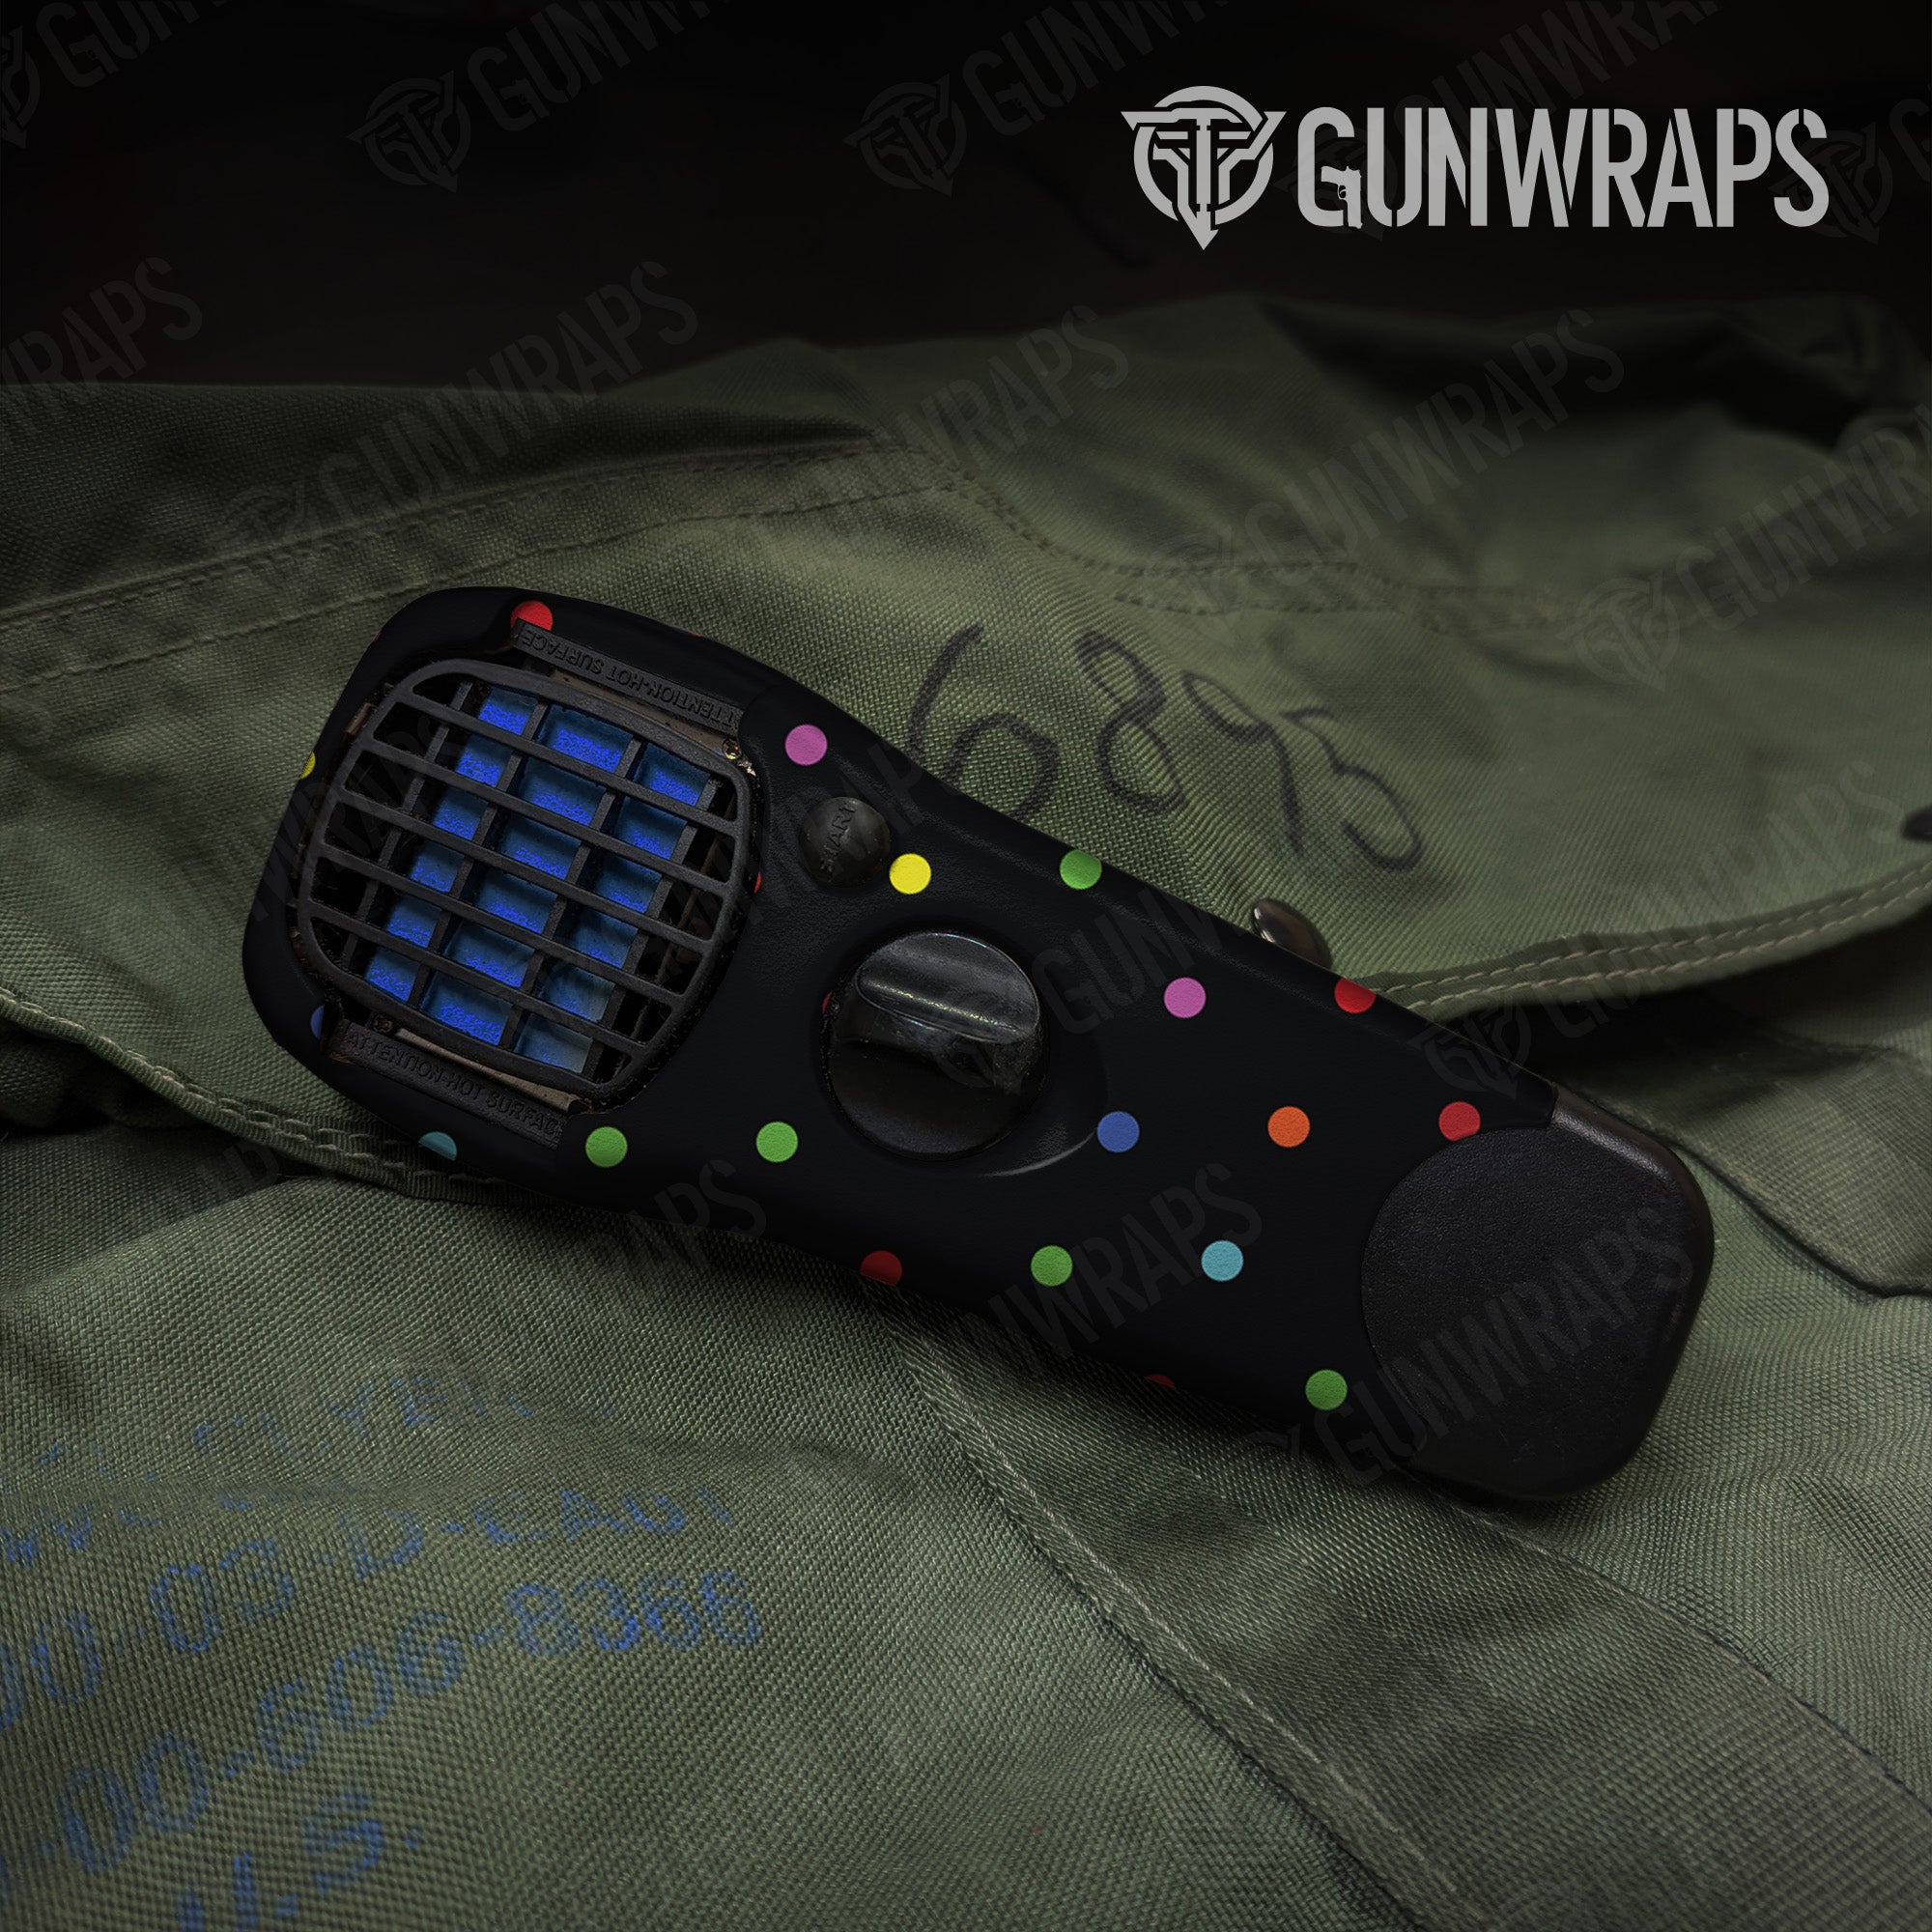 Thermacell Dotted Multicolor Gear Skin Pattern